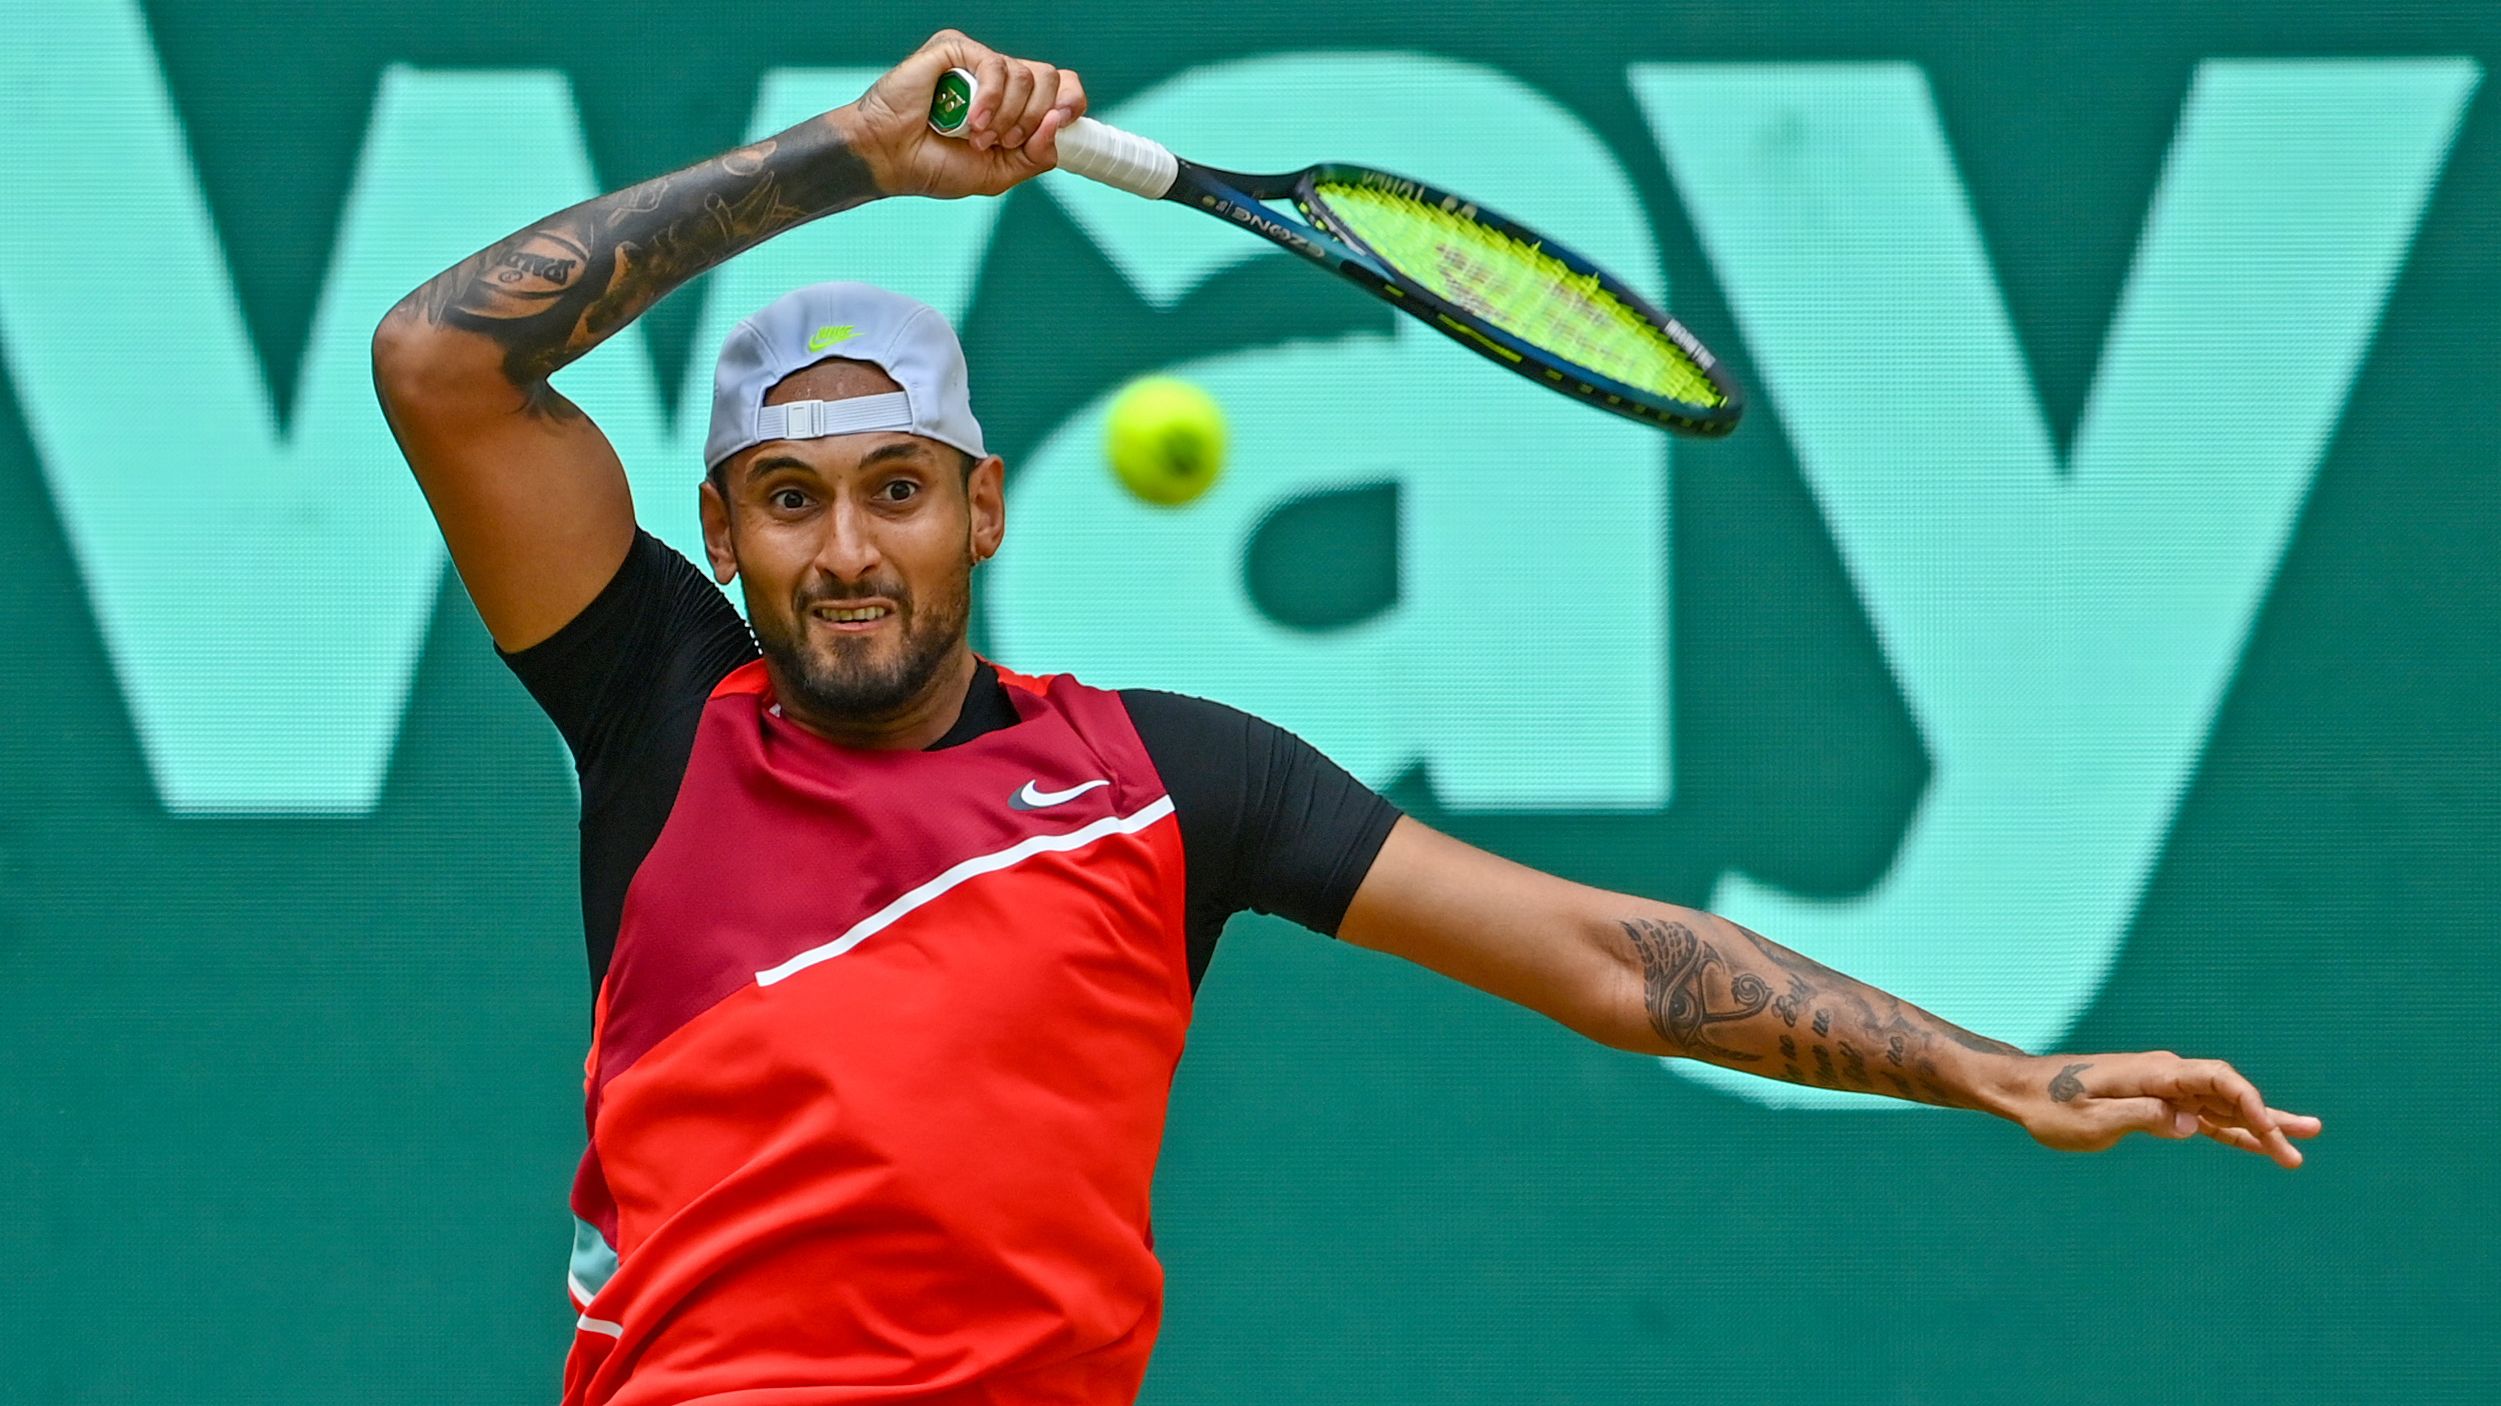 Nick Kyrgios plays a forehand in his match against Pablo Carreno Busta.